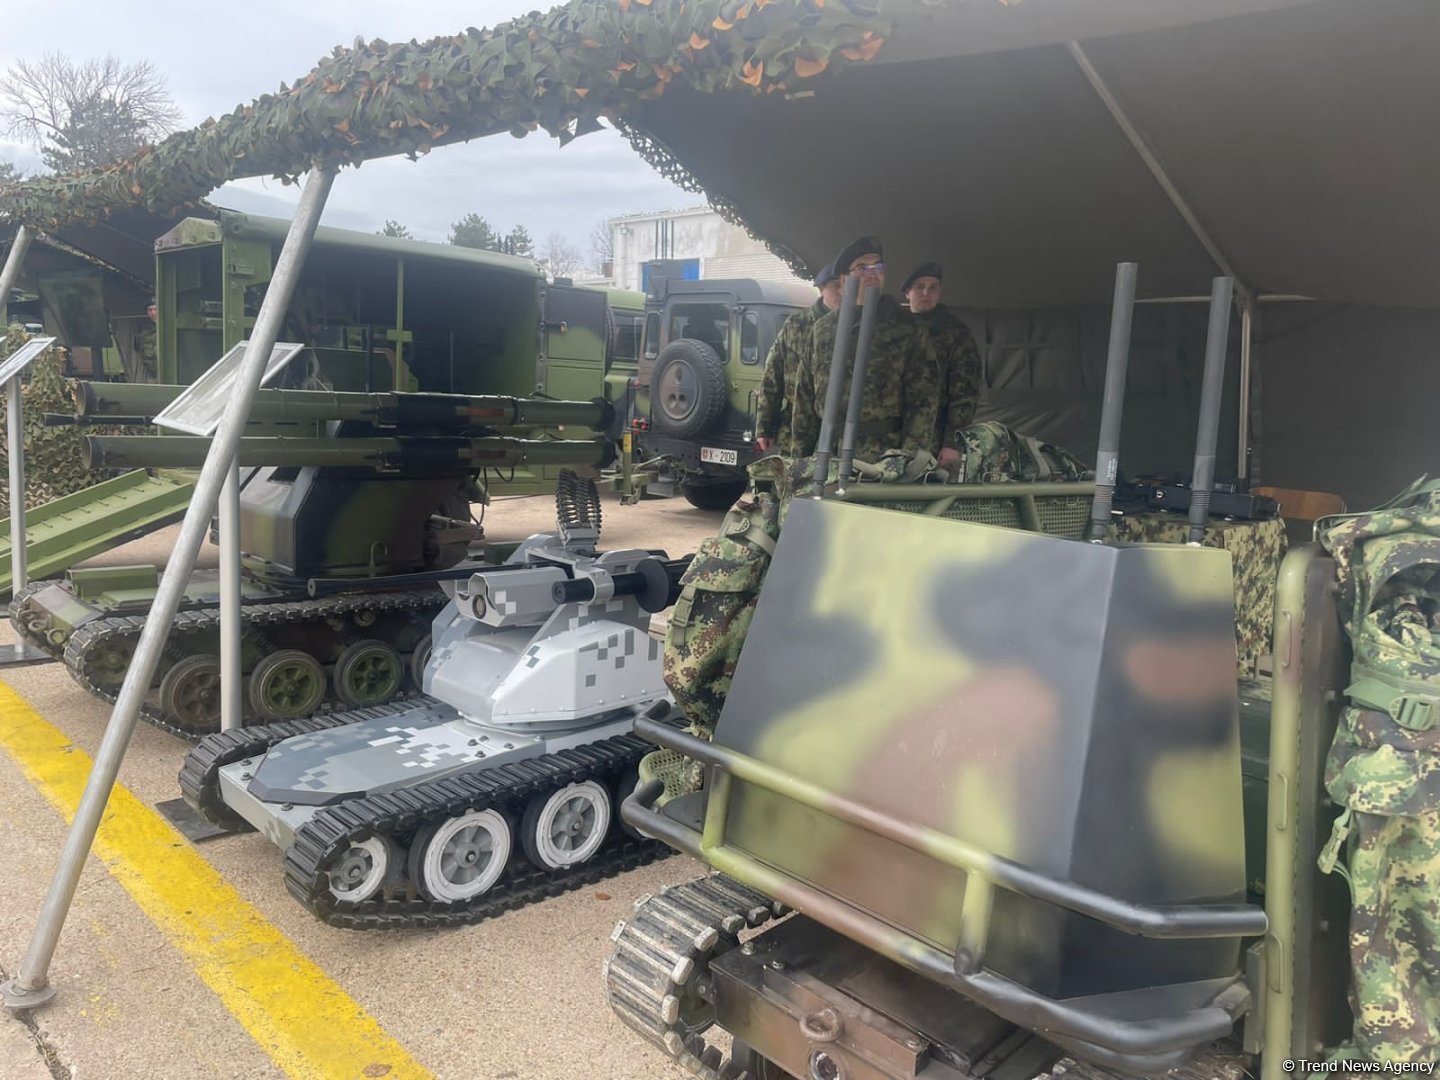 Equipment and capabilities of Serbian Armed Forces presented (PHOTO/VIDEO)